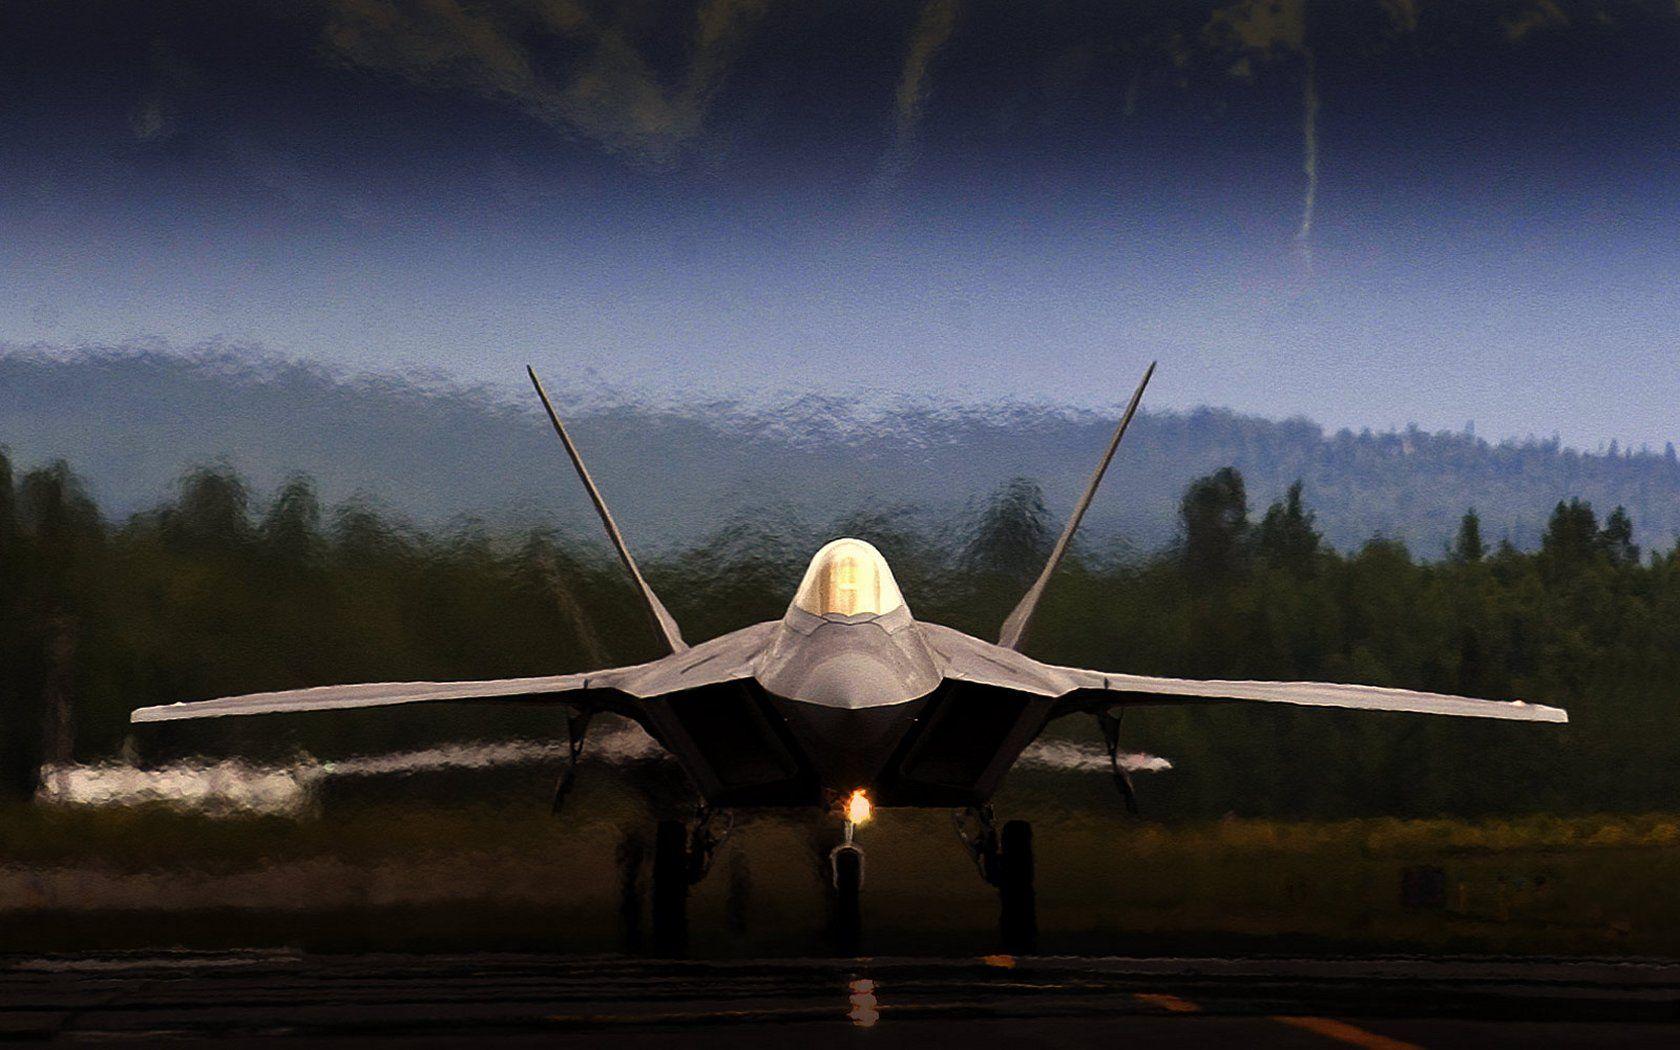 Gallery For Gt F22 Wallpaper